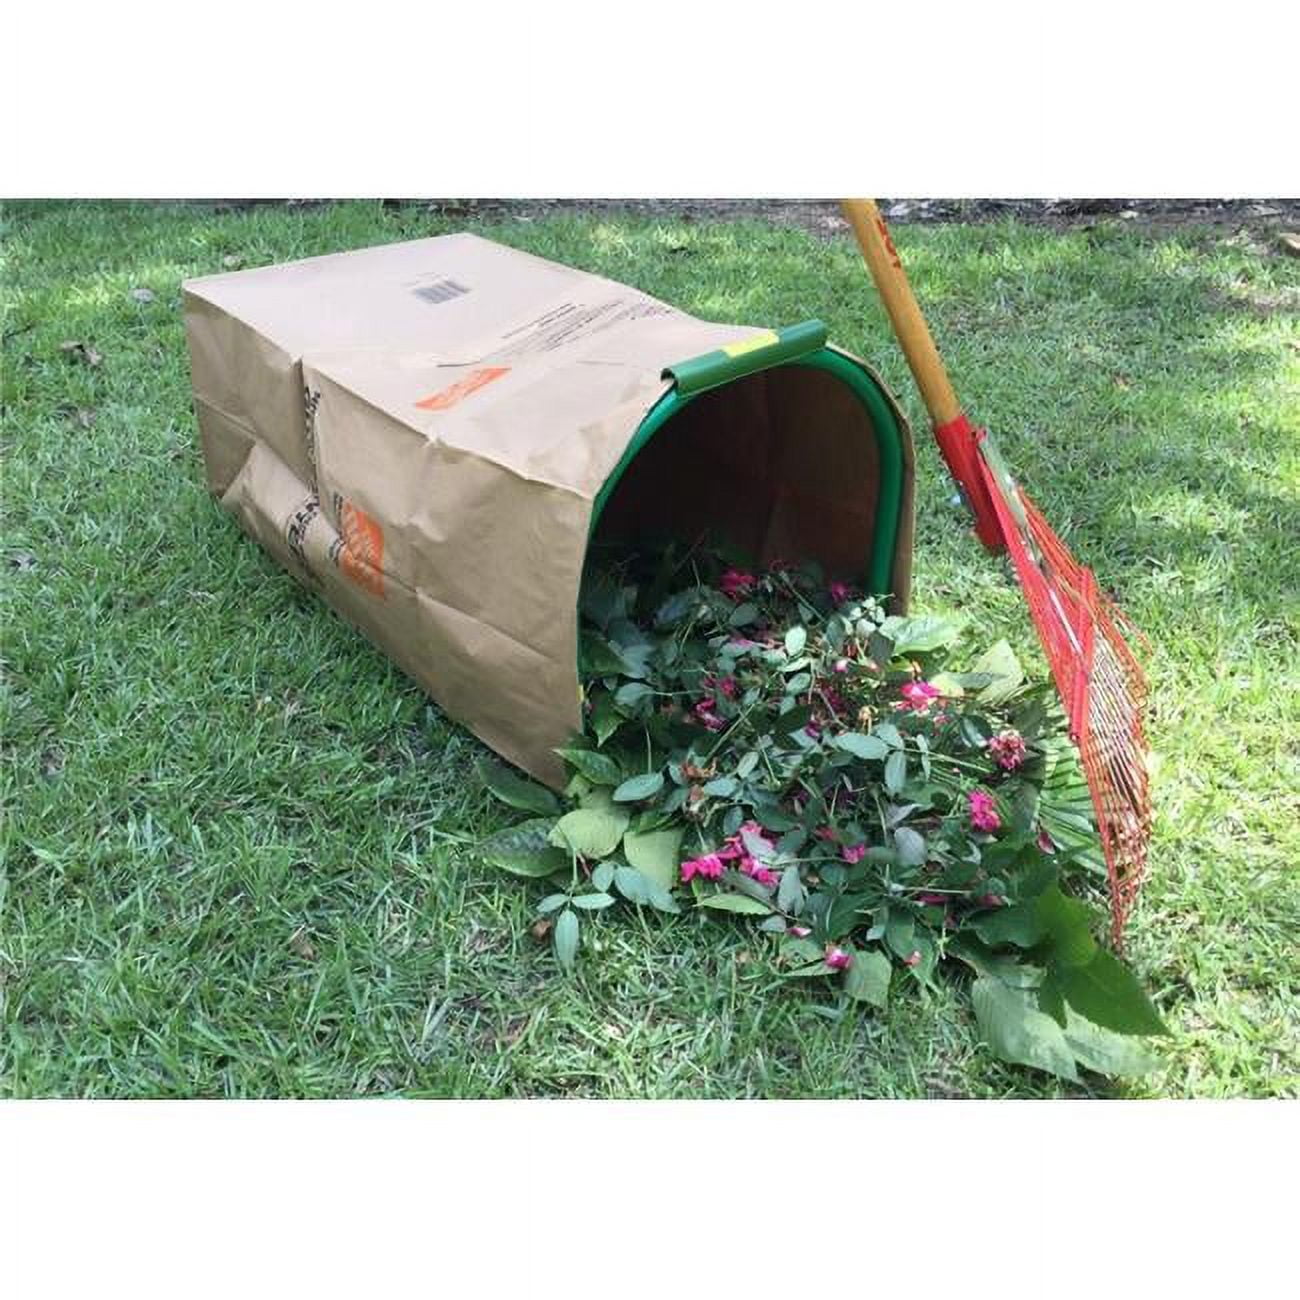  Leaf Gulp Lawn Bag Holder For 39 Gallon PLASTIC or 33 Gallon  compostable BIO-BAGS Leaf Bags. Stabs in the ground for Hands-Free Bagging.  Made in USA : Health & Household